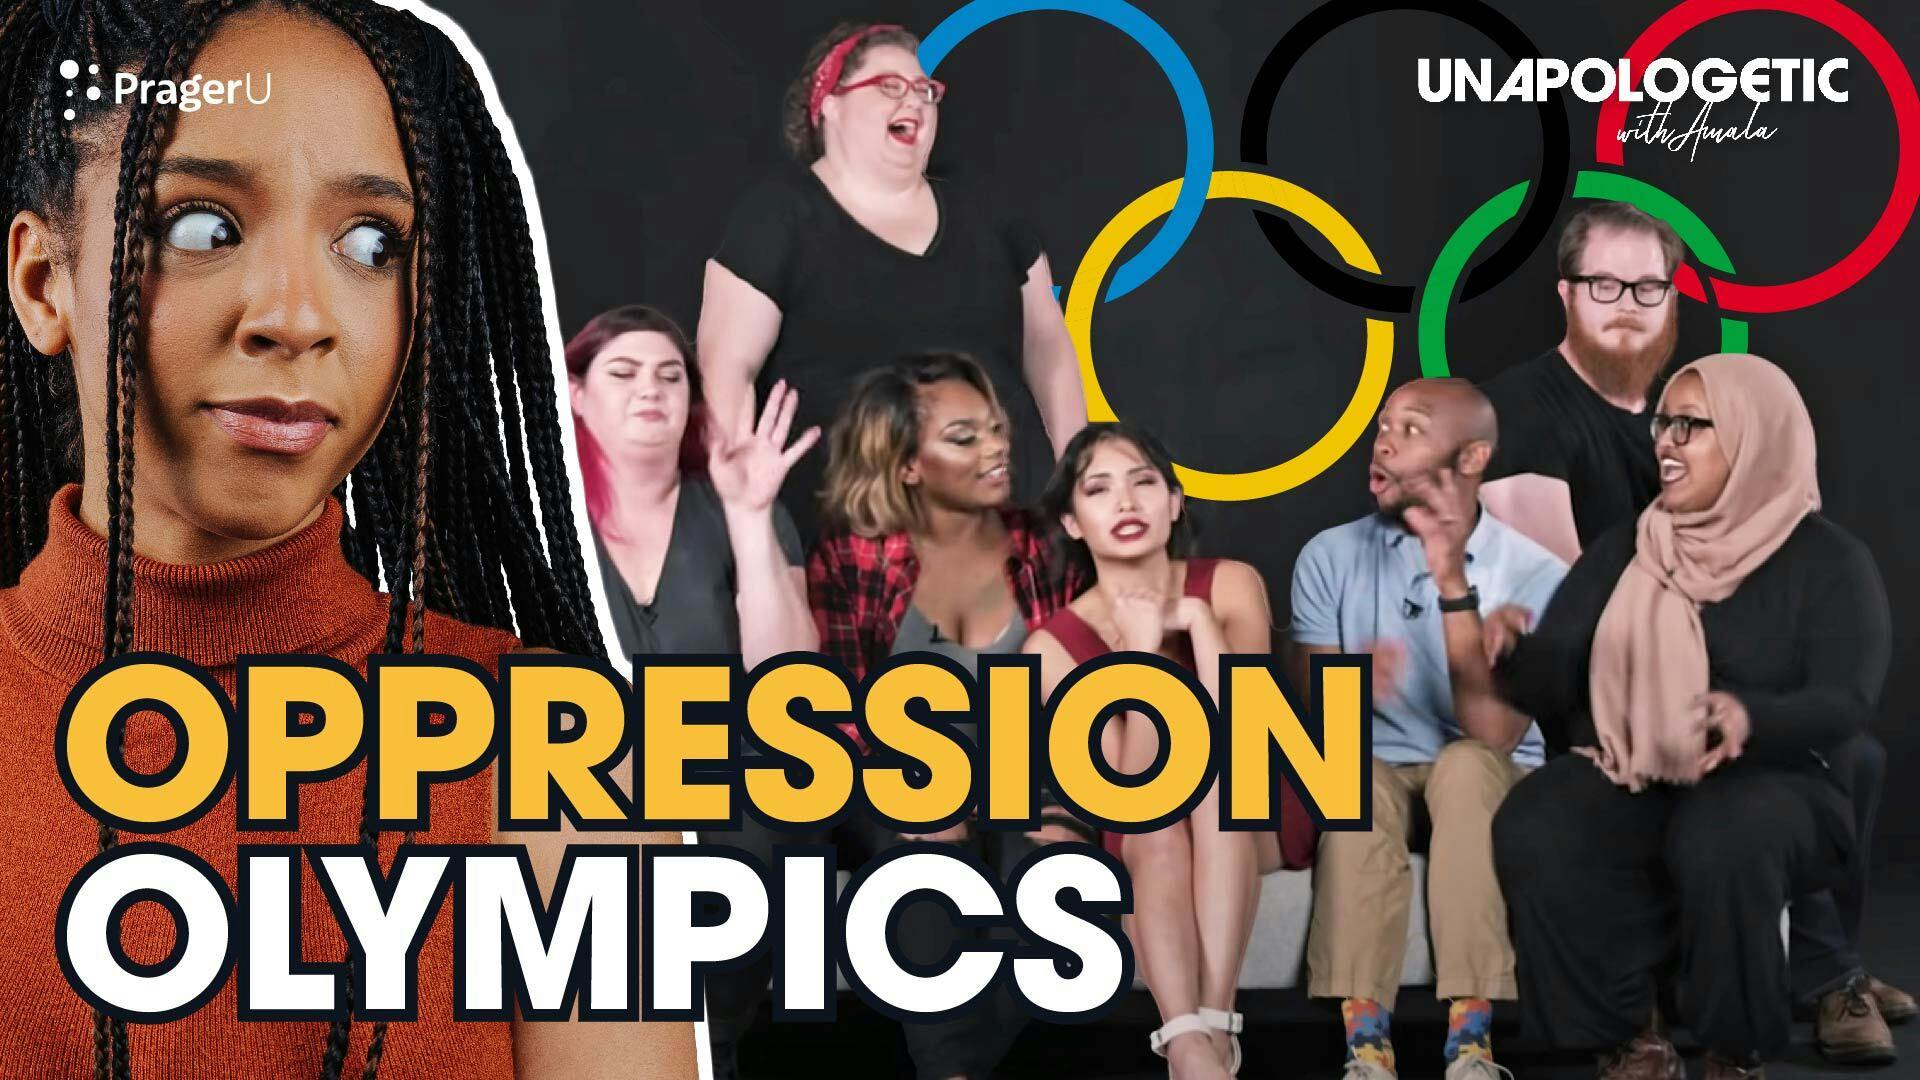 7 Strangers Compete in the Oppression Olympics for $1,000